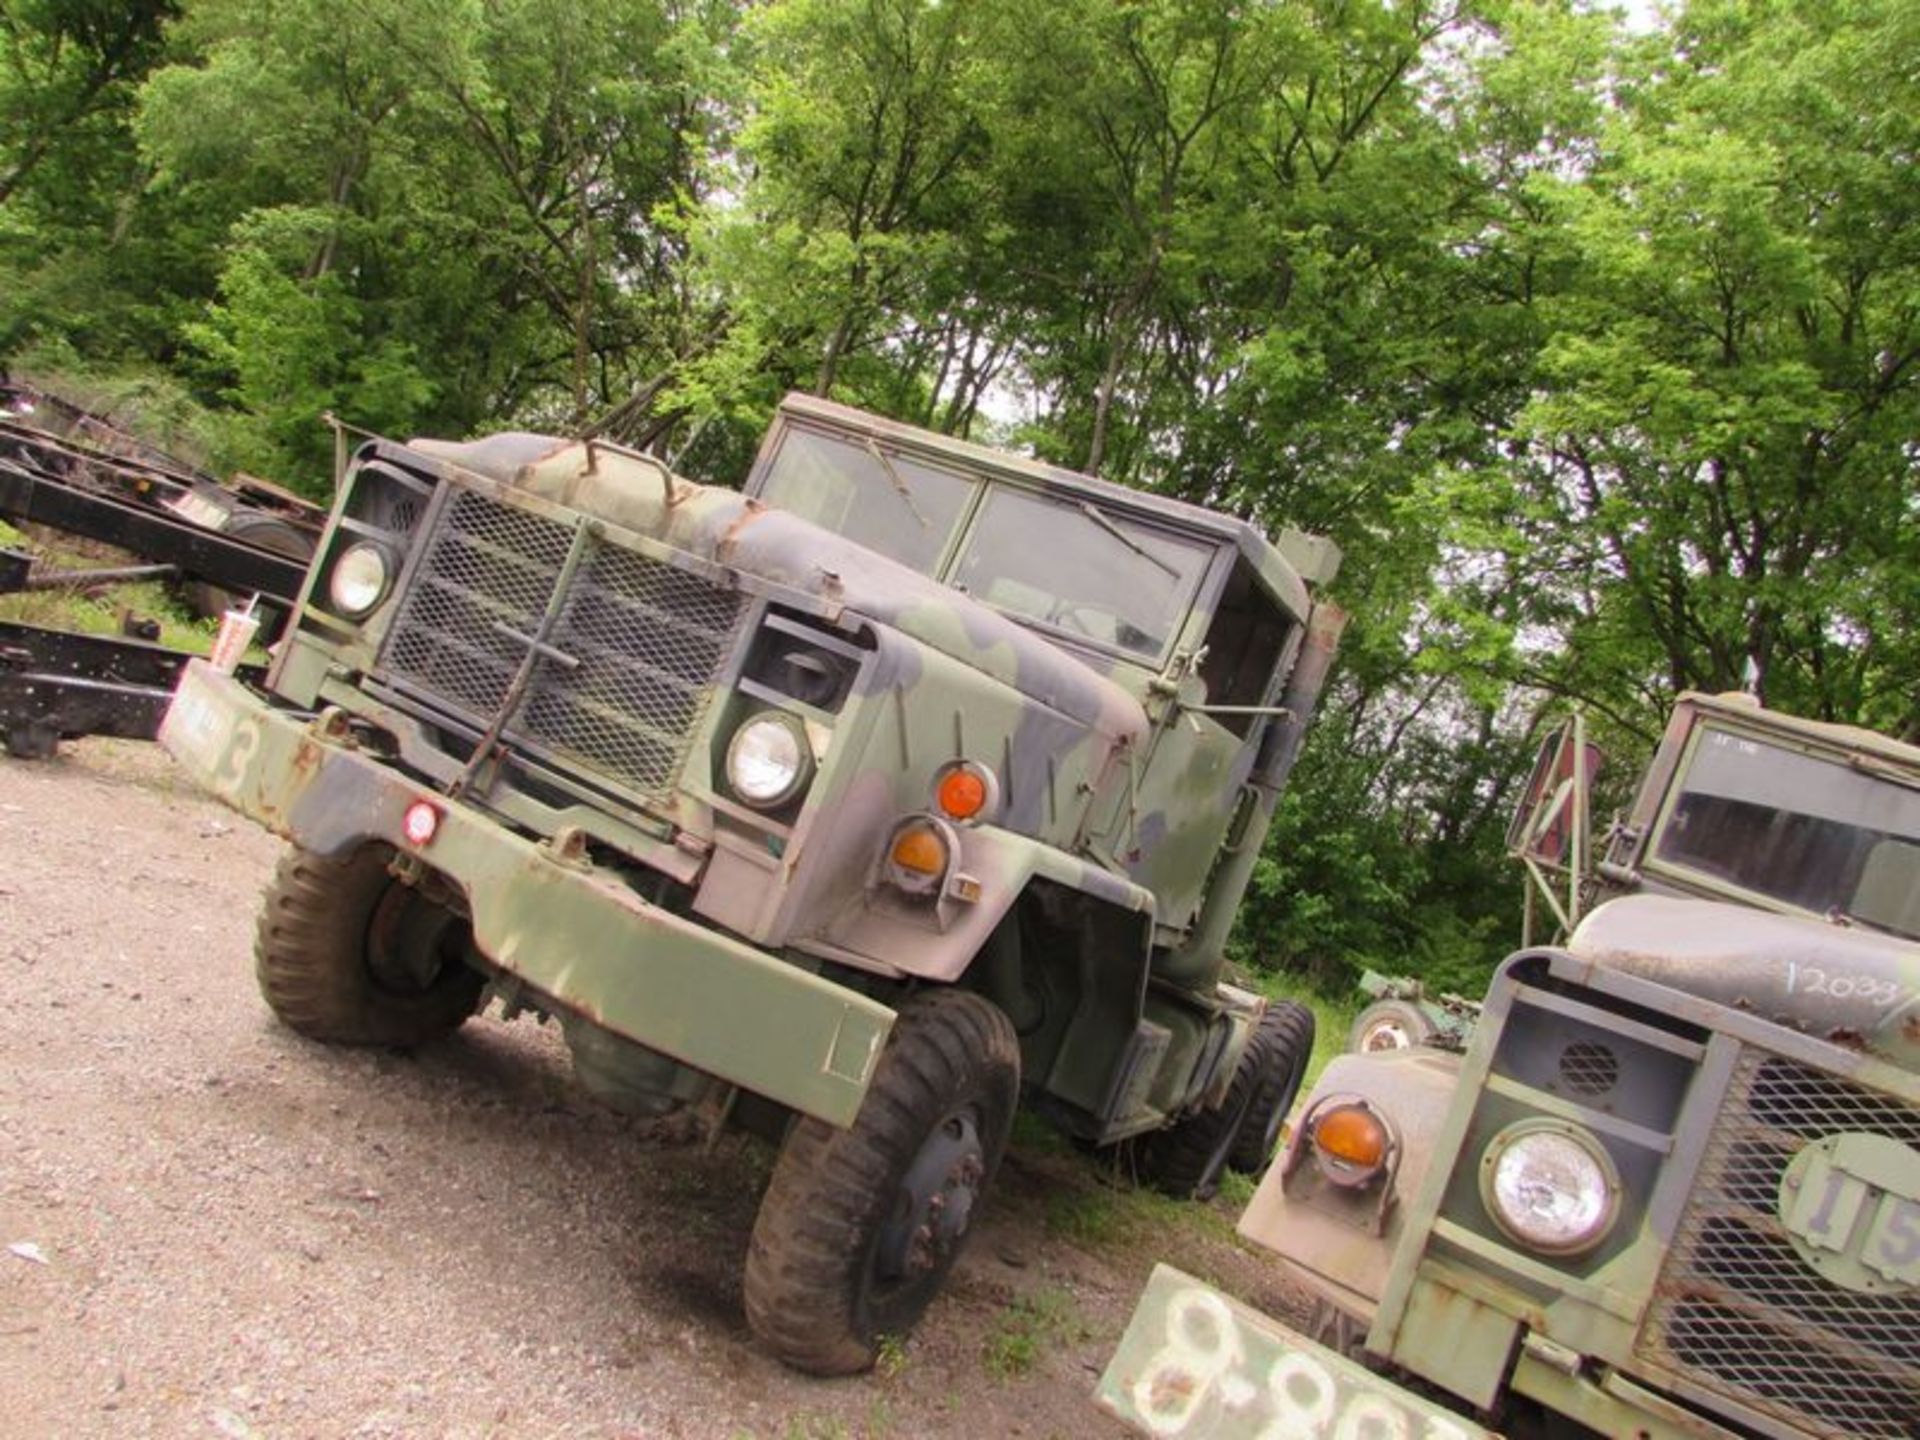 American General M932 5-ton 6x6 road tractor